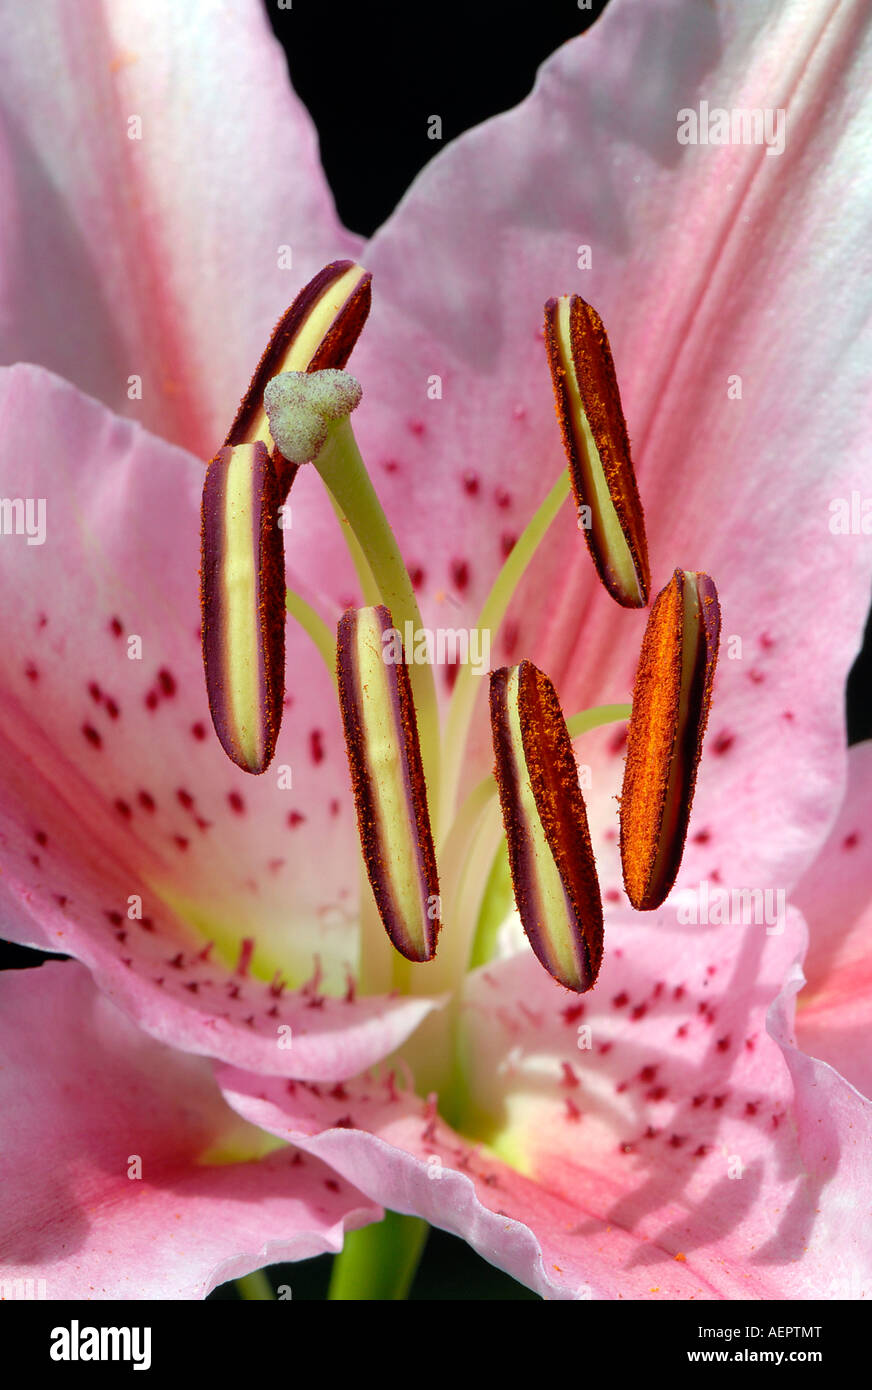 Close up of a Stargazer lily flower Stock Photo